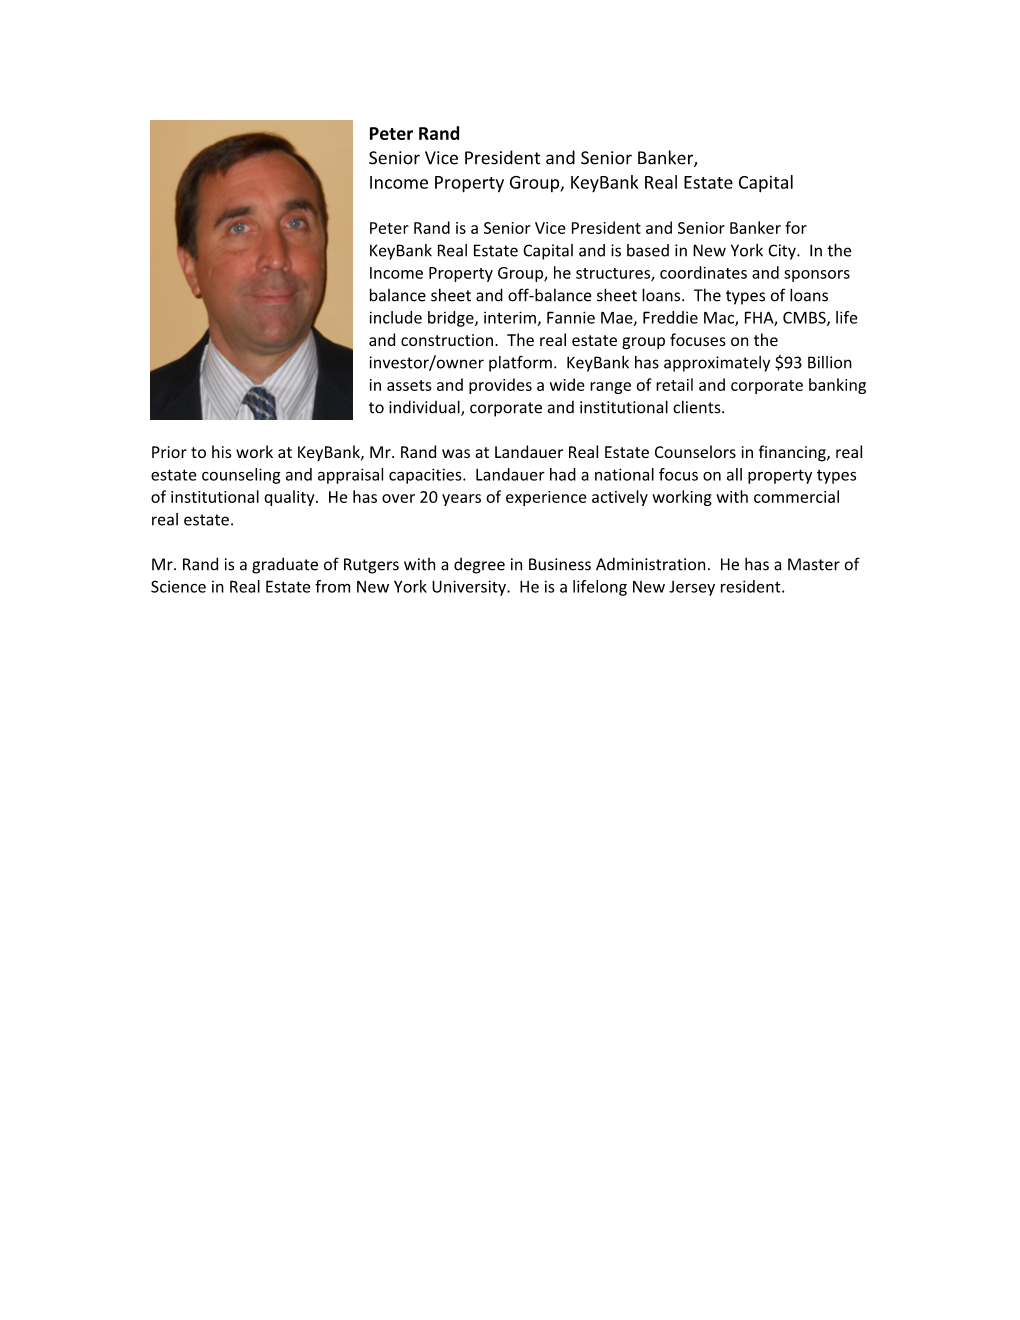 Peter Rand Is a Vice President and Senior Relationship Manager for Keybank Real Estate